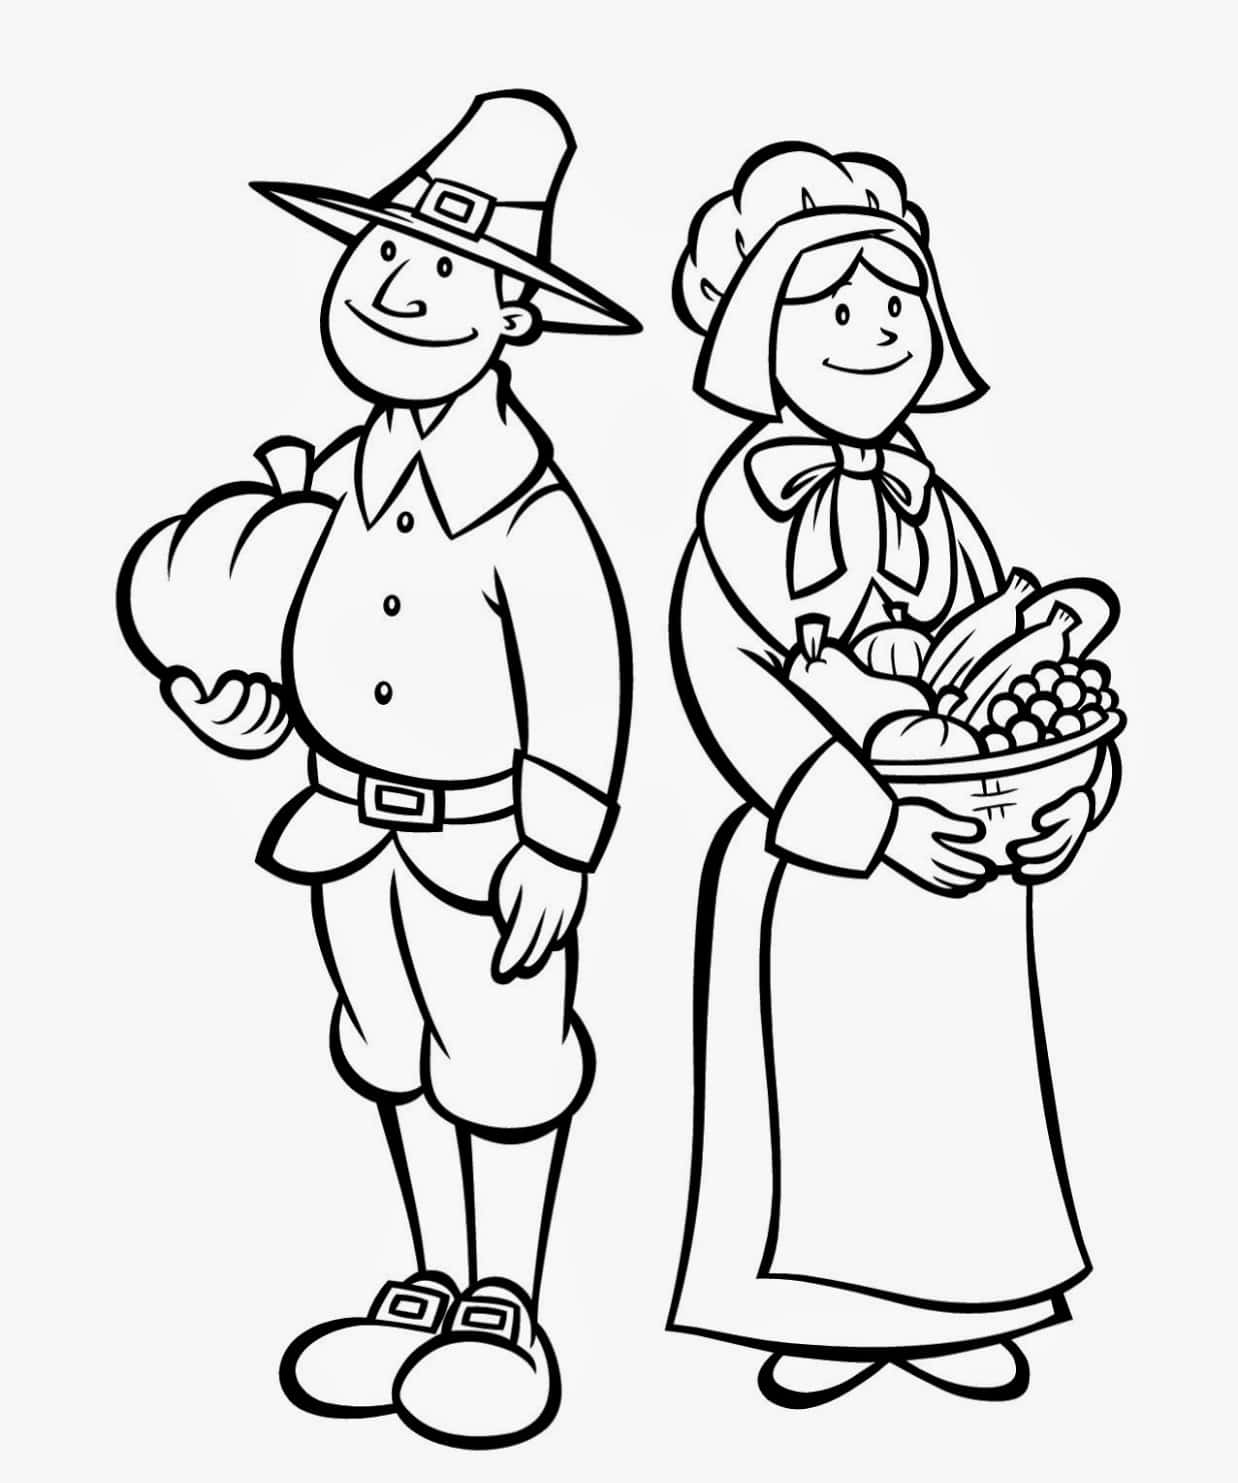 A Couple Of Pilgrims In Traditional Clothing